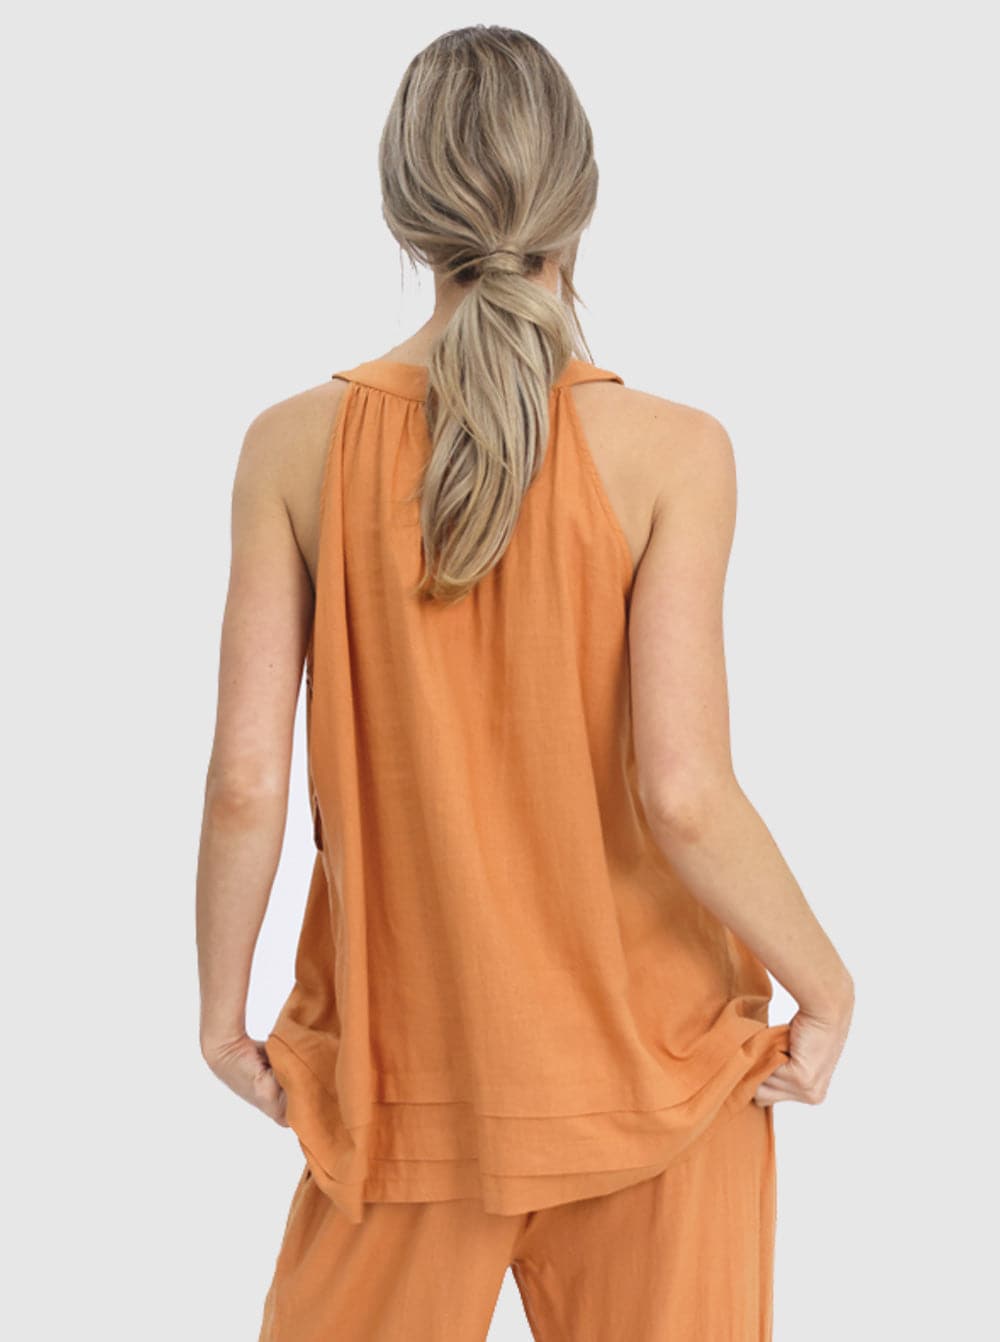 Maternity Sleeveless Linen Top in Orange - Angel Maternity - Maternity clothes - shop online (6588612345959)